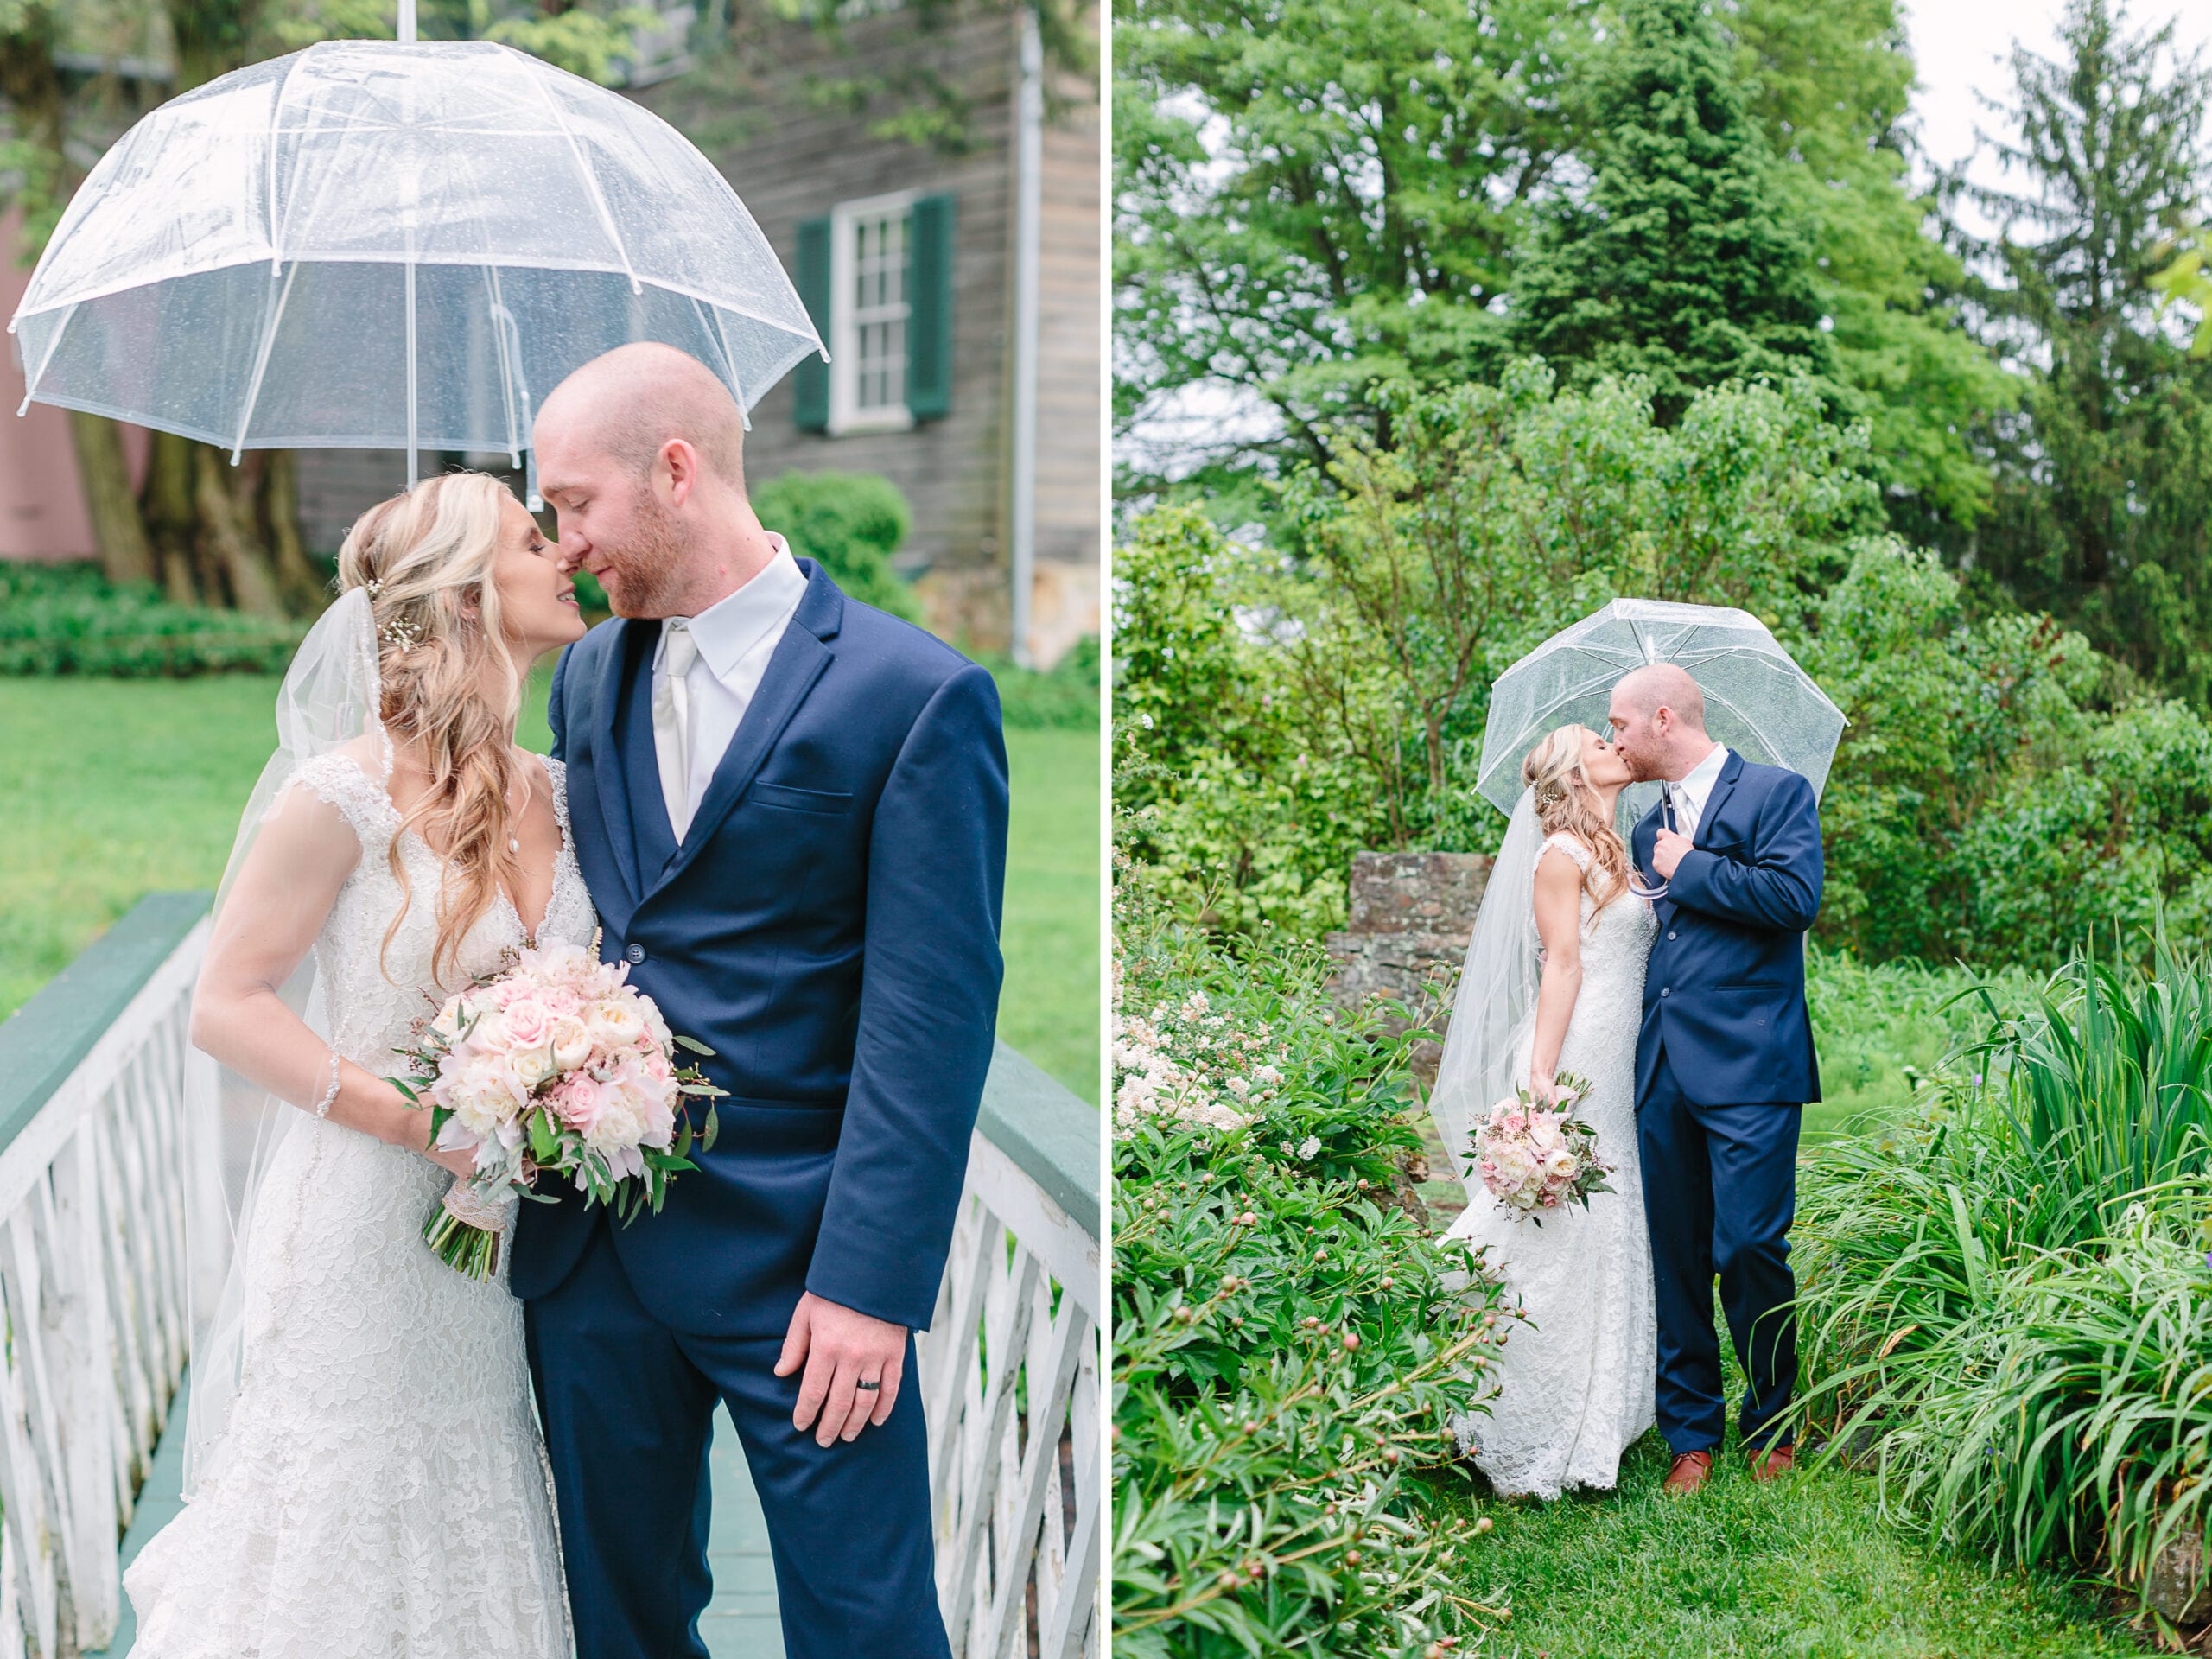 Rustic, Romantic Wedding at the Union Mills Homestead by Lauren Myers Photography